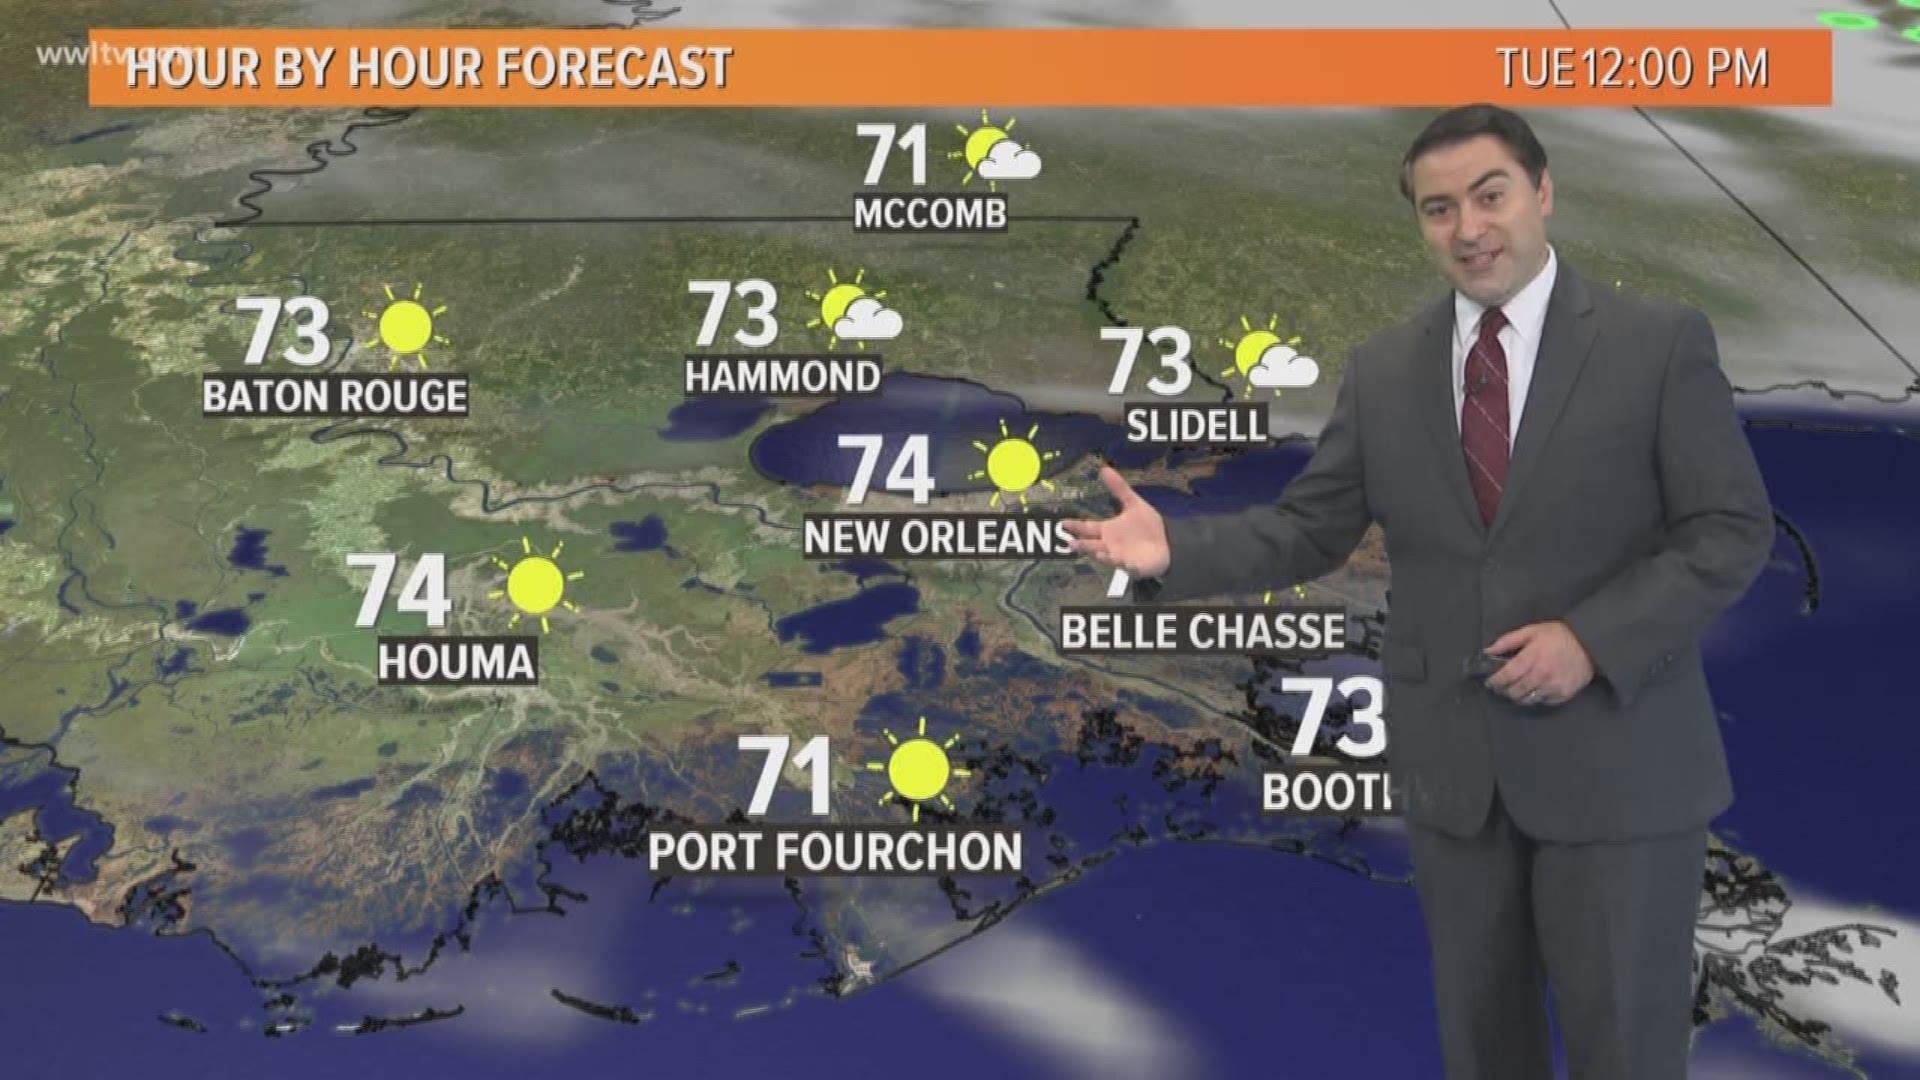 Meteorologist Dave Nussbaum says it will be warmer day with low humidity and plenty of sunshine.